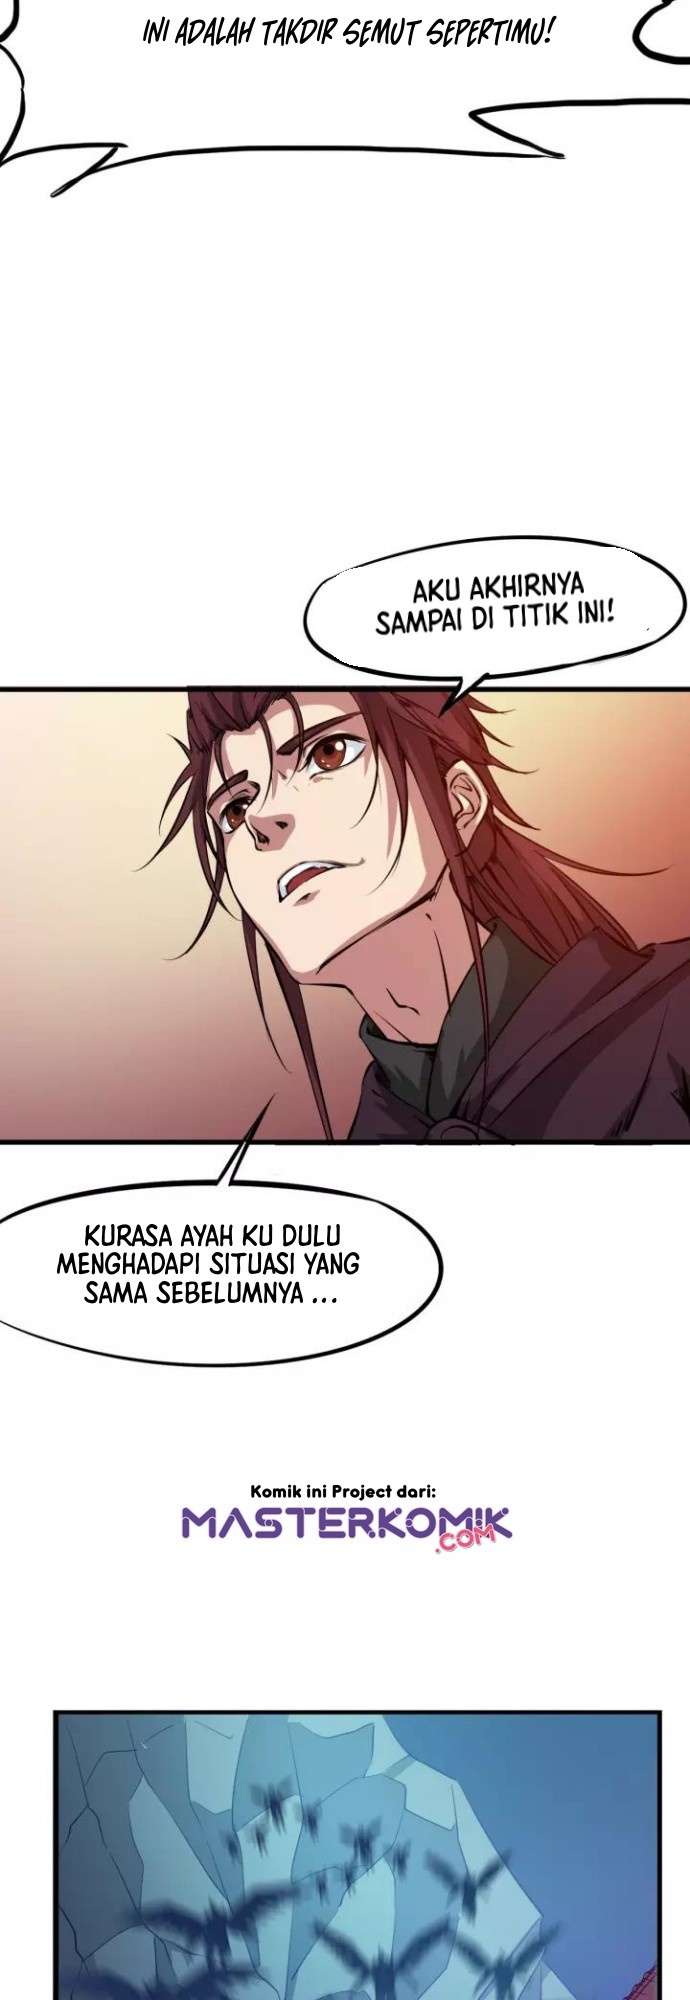 Dragon’s Blood Vessels Chapter 55